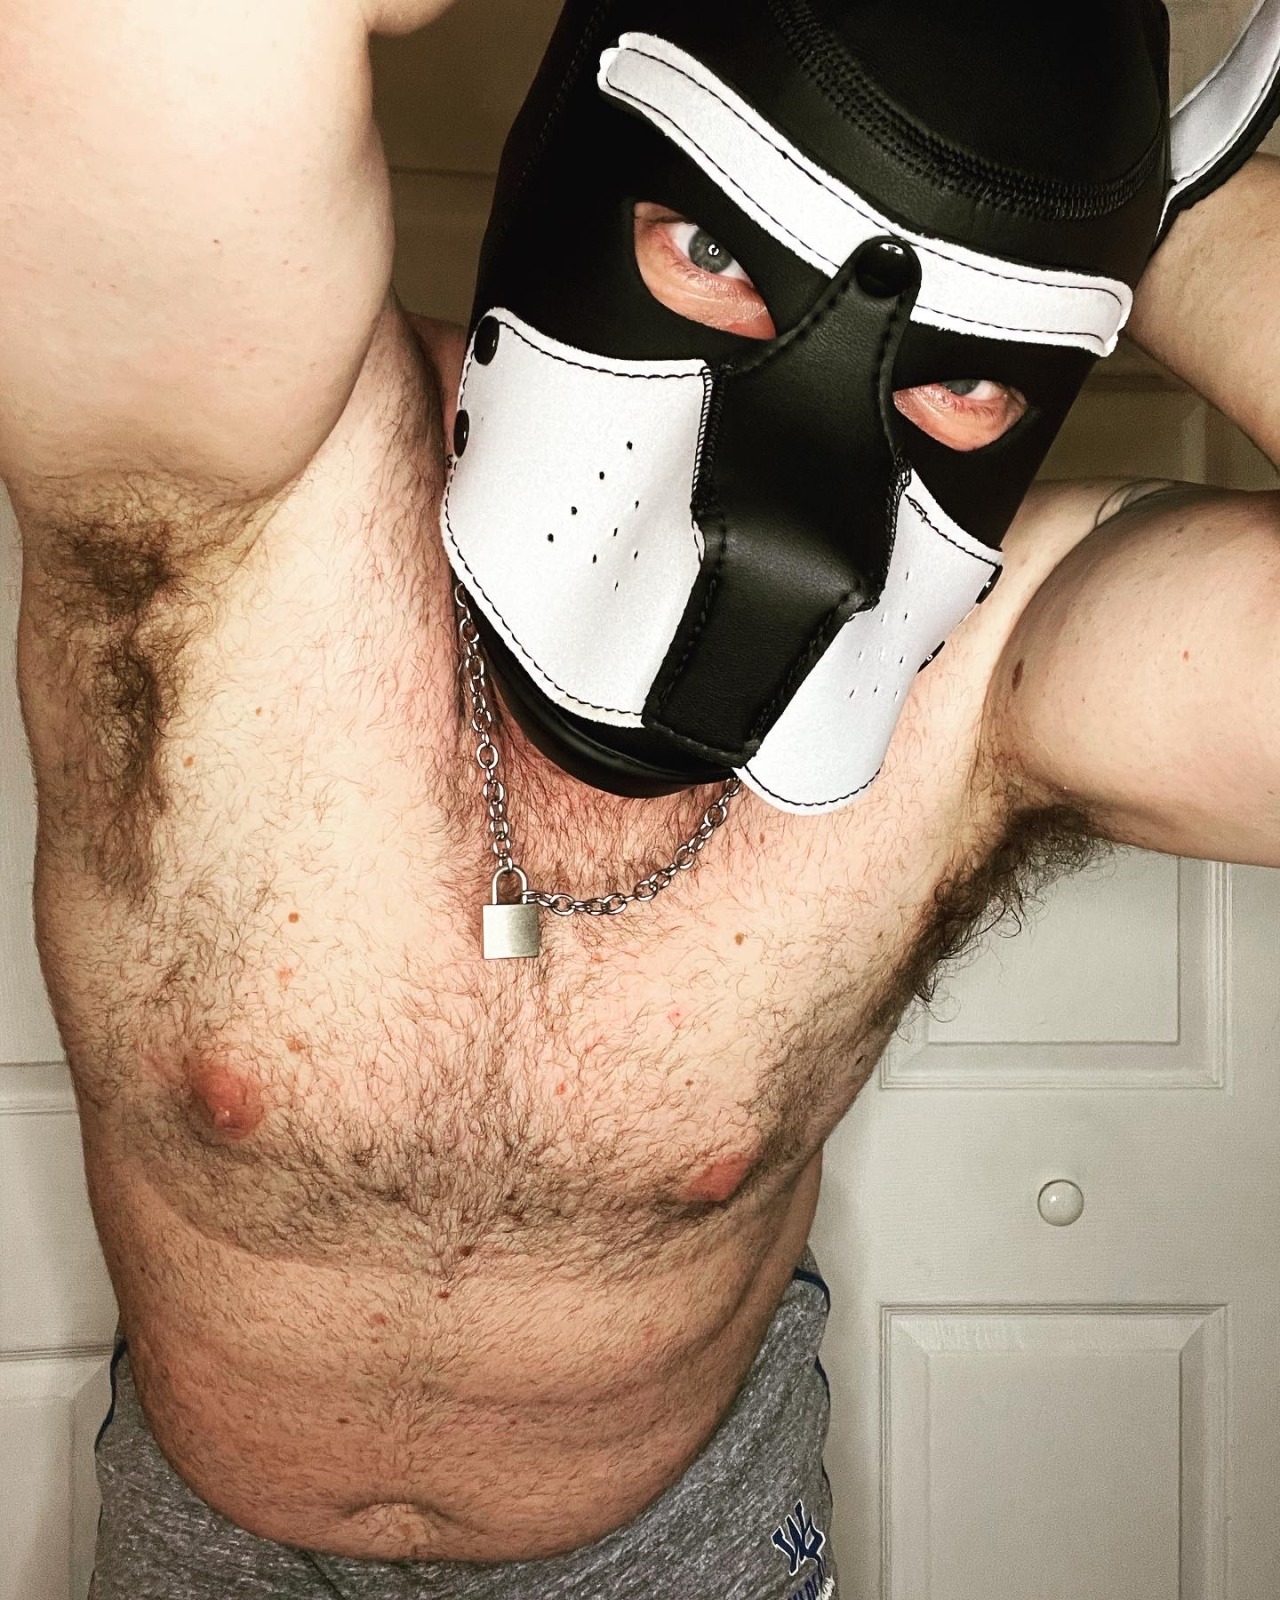 country-pup1-deactivated2023013:Throwback Thursday featuring my first pup hood I ever owned 🥰